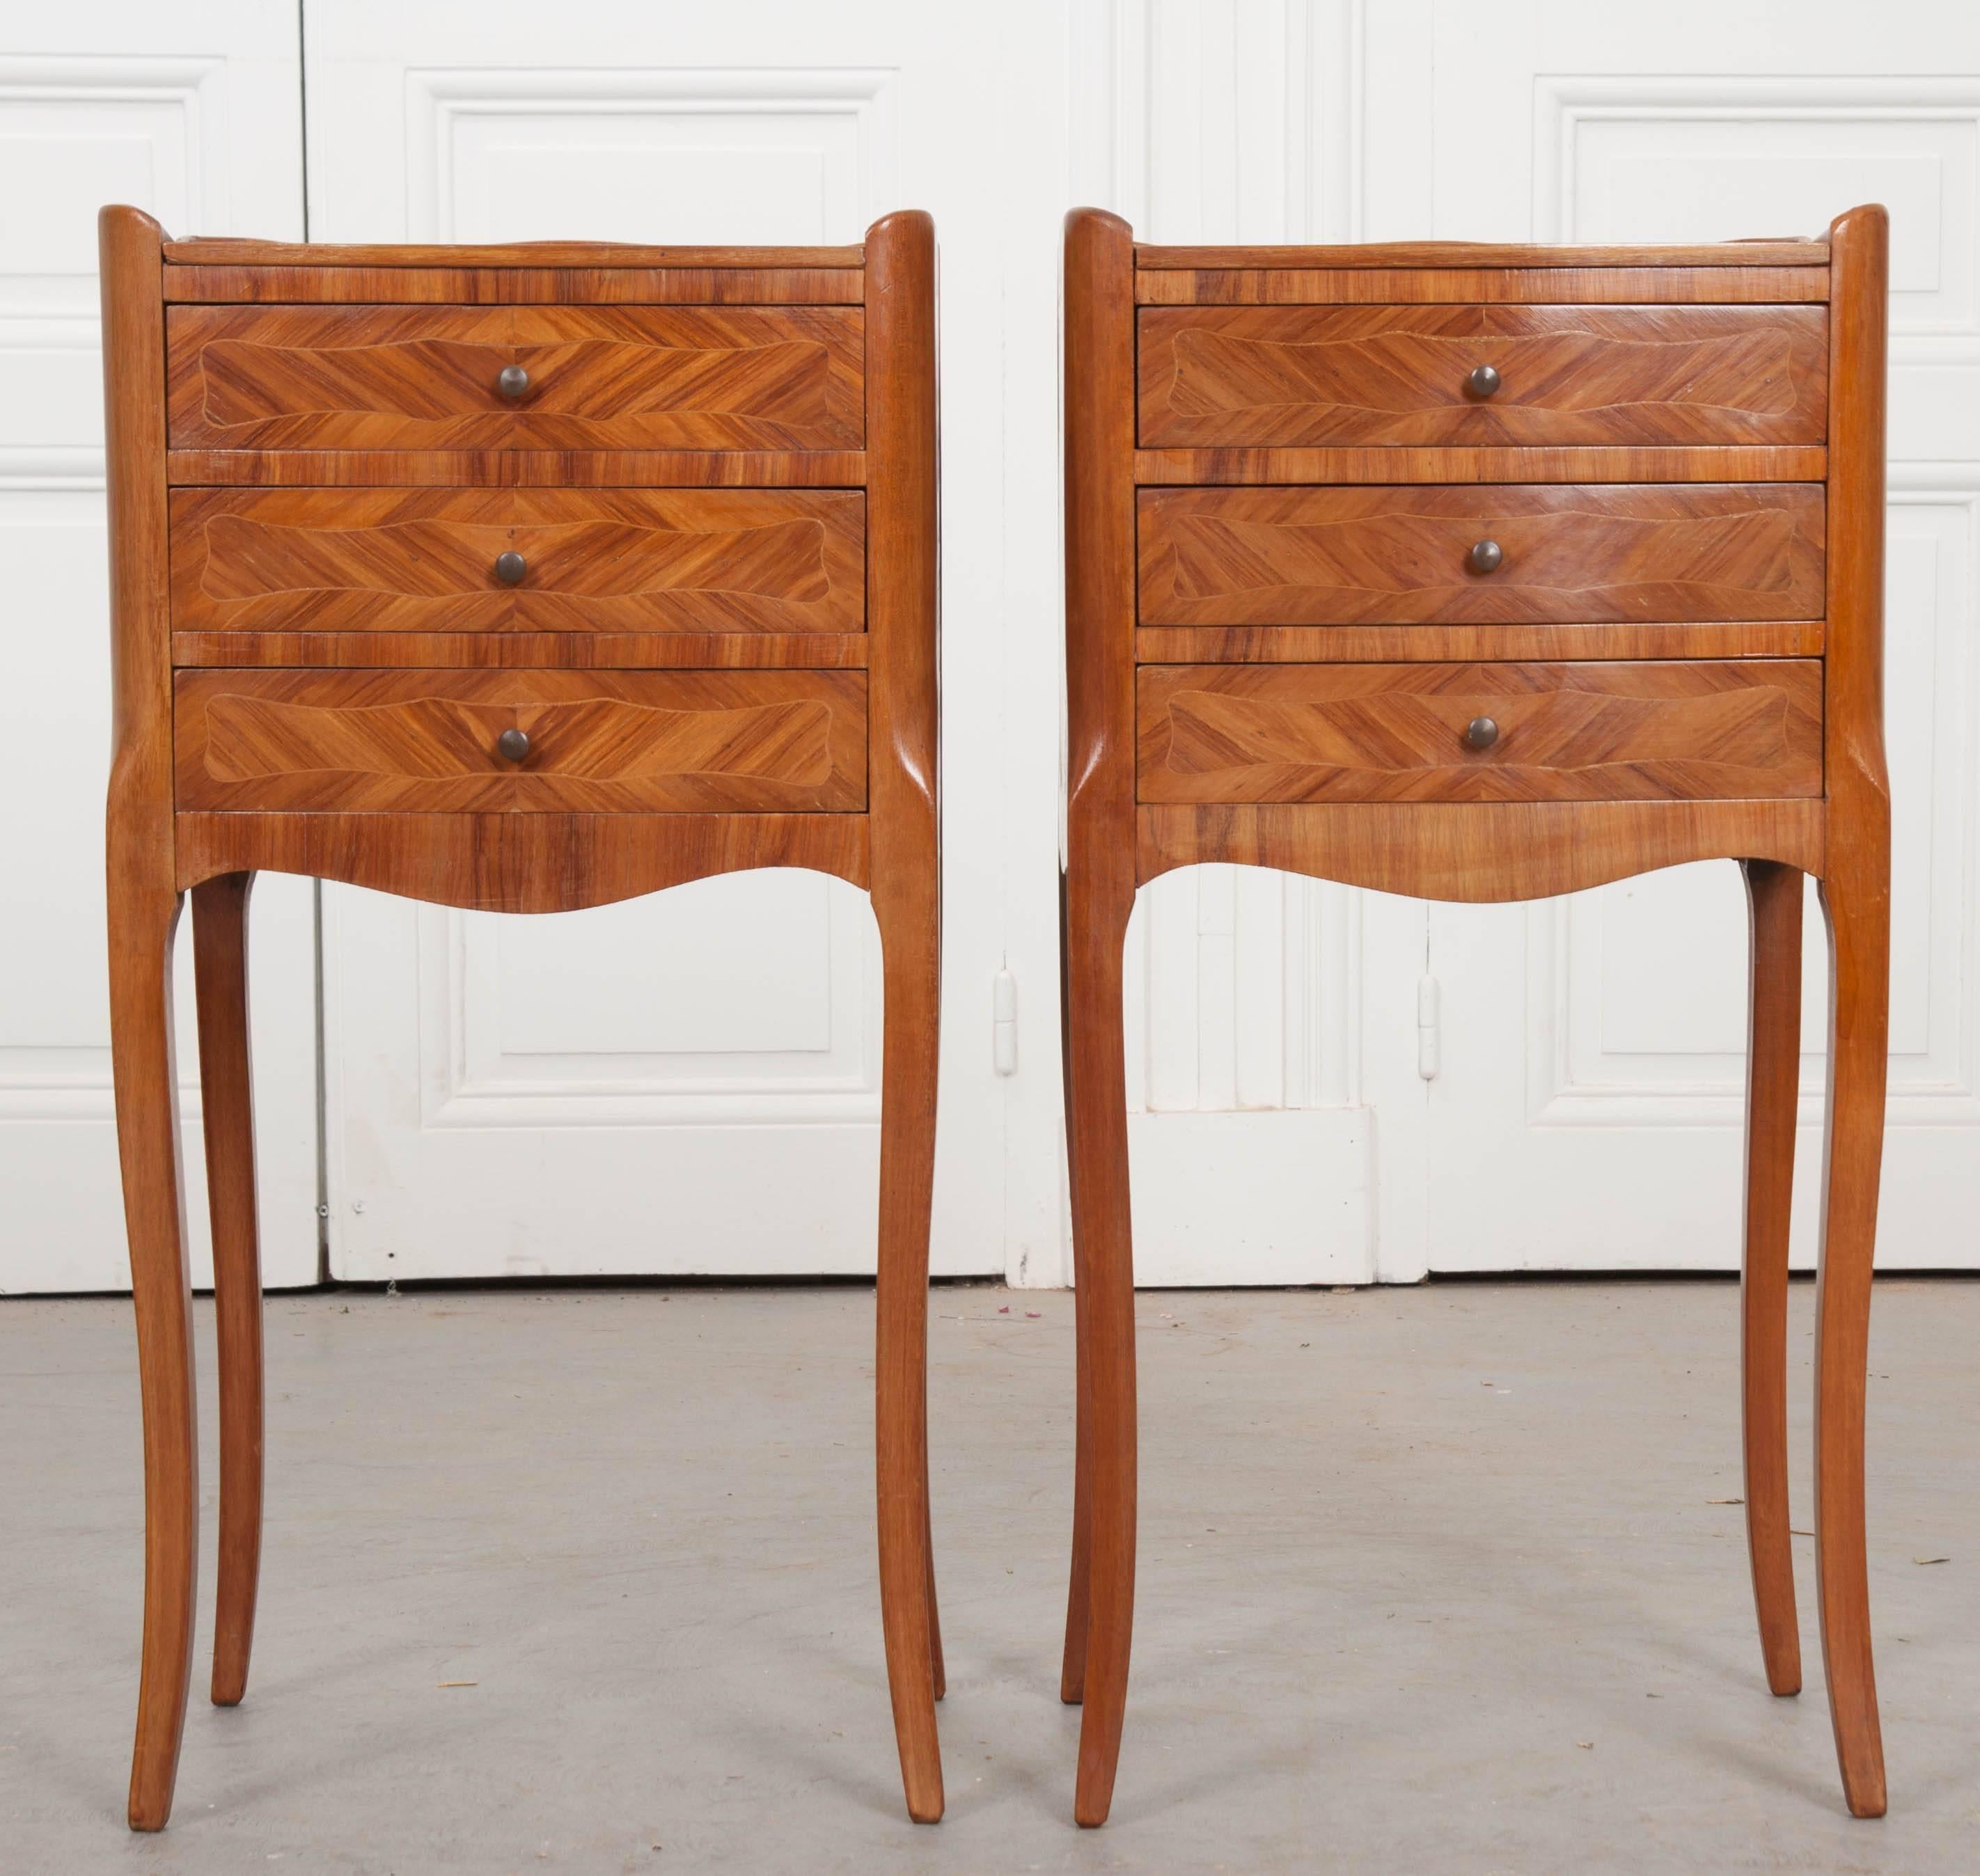 A refined pair of satinwood marquetry bedside tables from 1950s, France. The tables each have three drawers, with their façades finished in exceptional satinwood marquetry and inlay. The tops and sides have also been finished in this mesmerizing